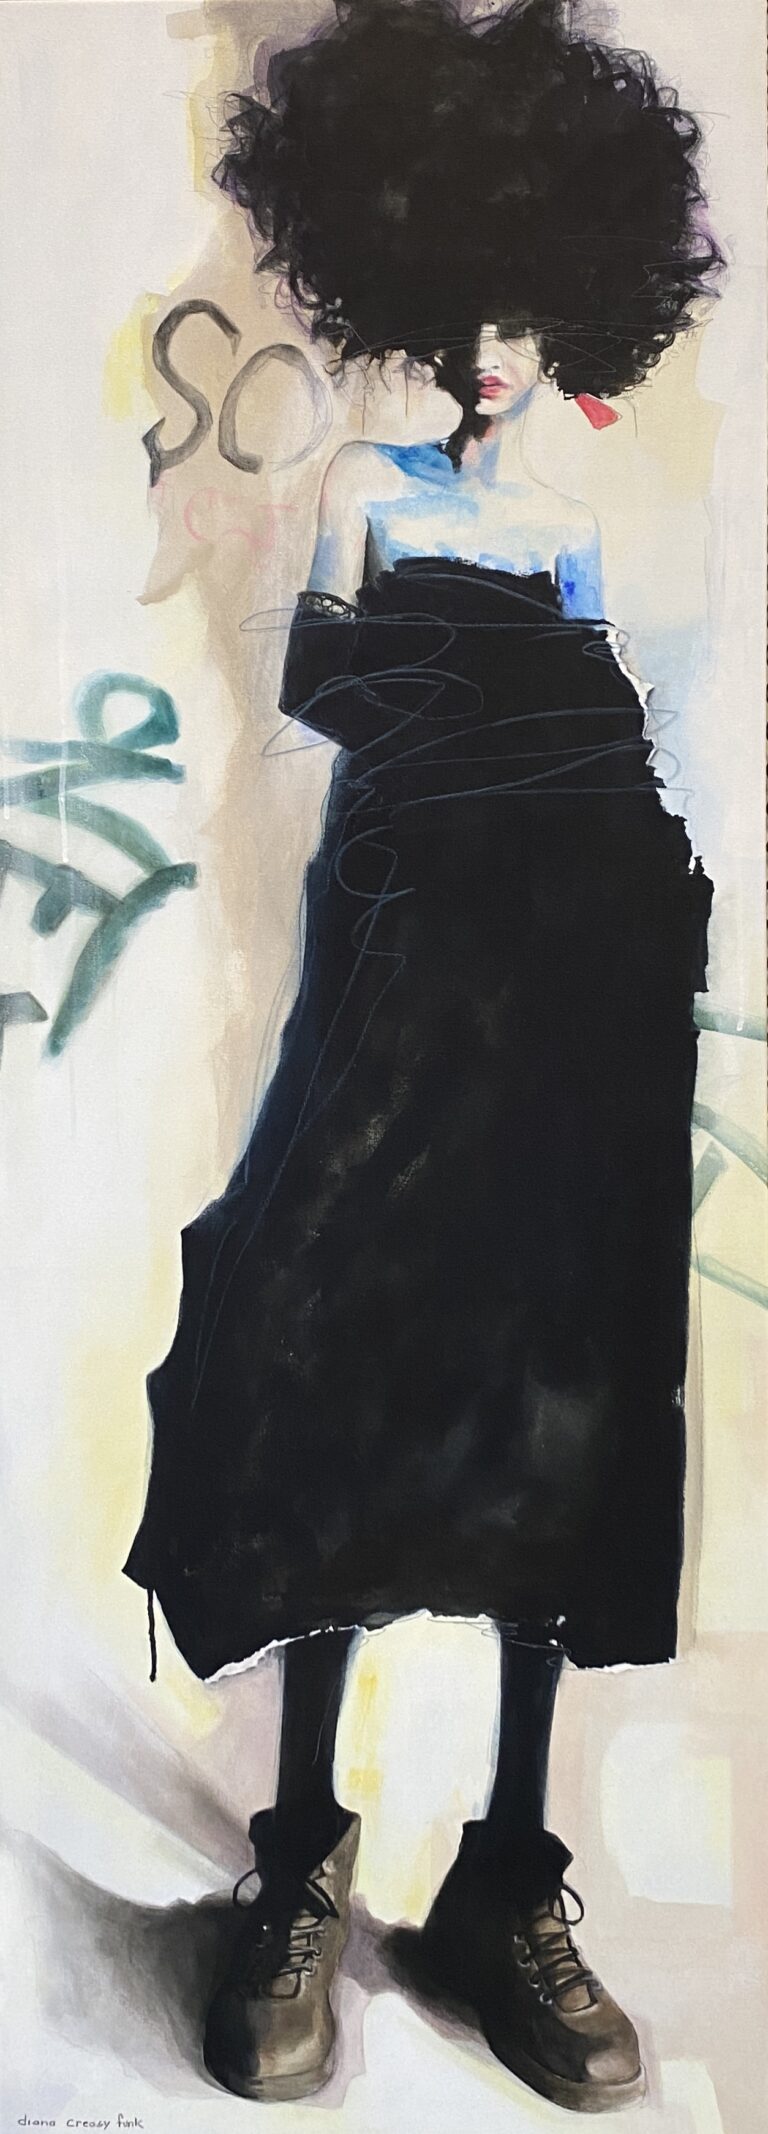 A Girl in a black dress painting by Diana Creasy-Funk